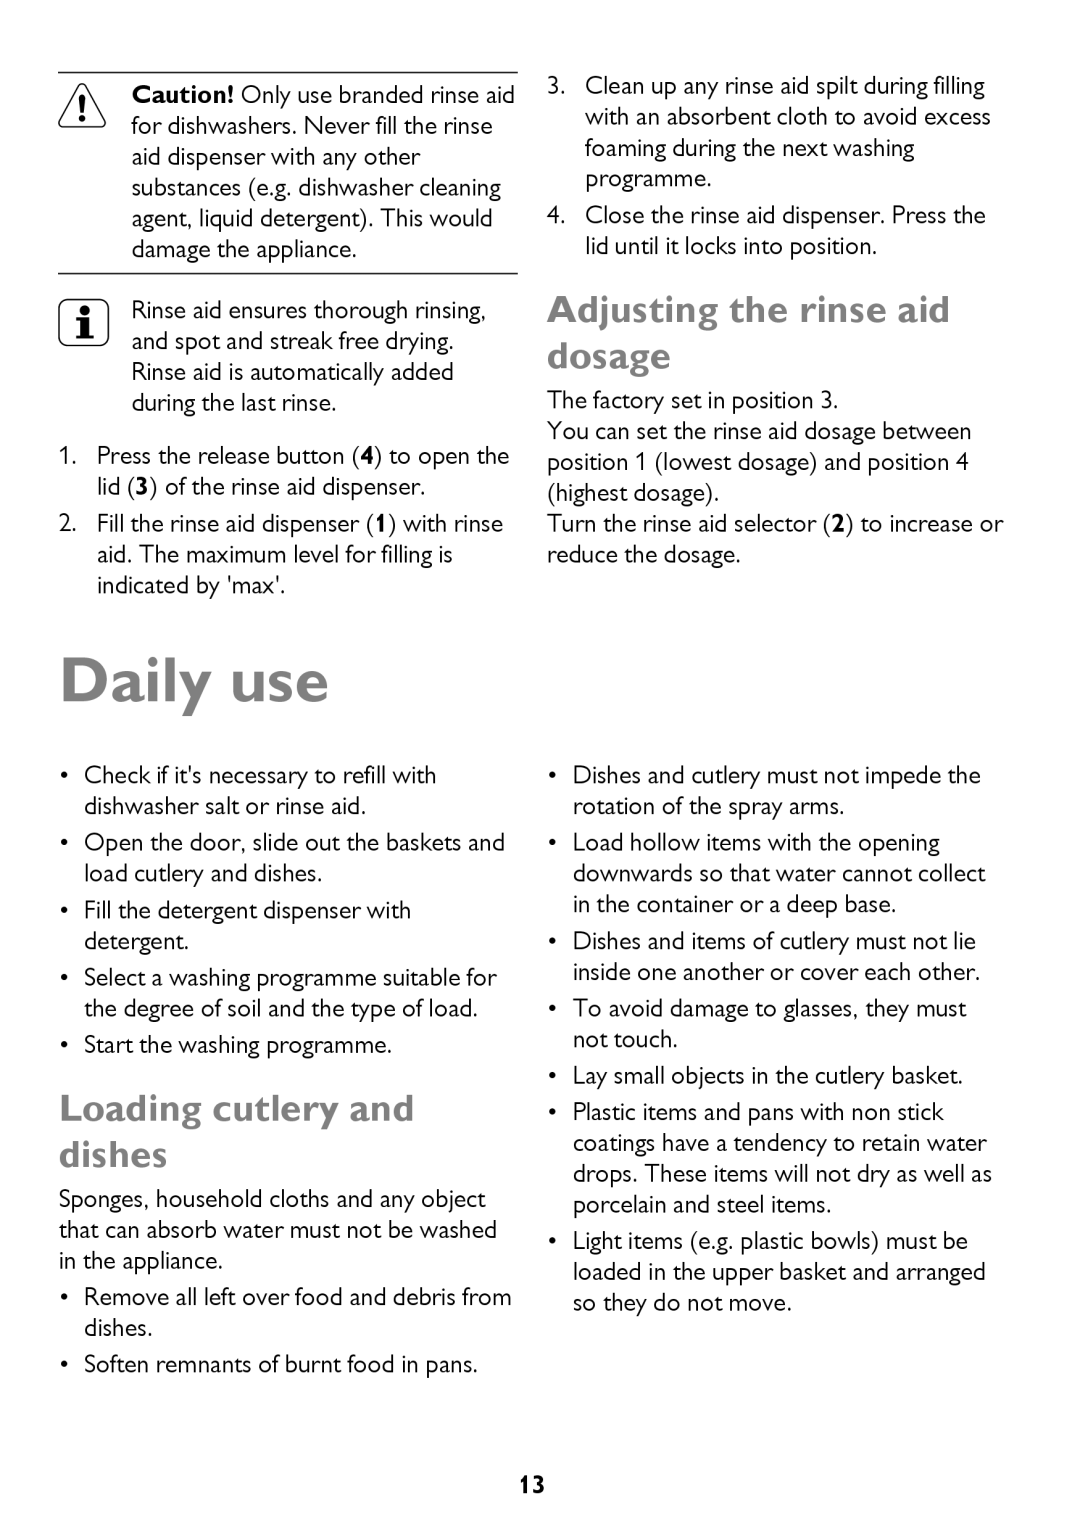 John Lewis JLDW 1221 instruction manual Daily use, Adjusting the rinse aid dosage, Loading cutlery and dishes 